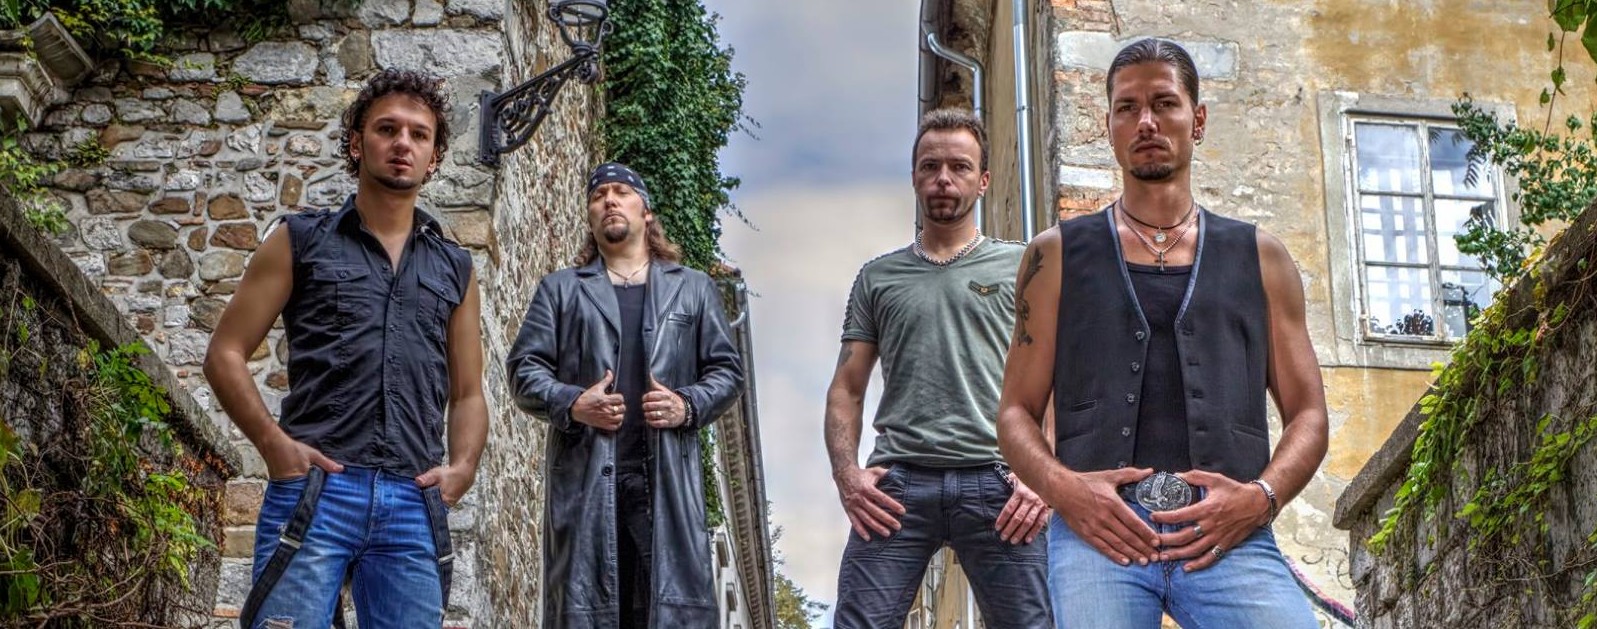 San Di Ego: “We are one of the most promising rock bands in our country” (Slovenian finalist – Exclusive Interview)